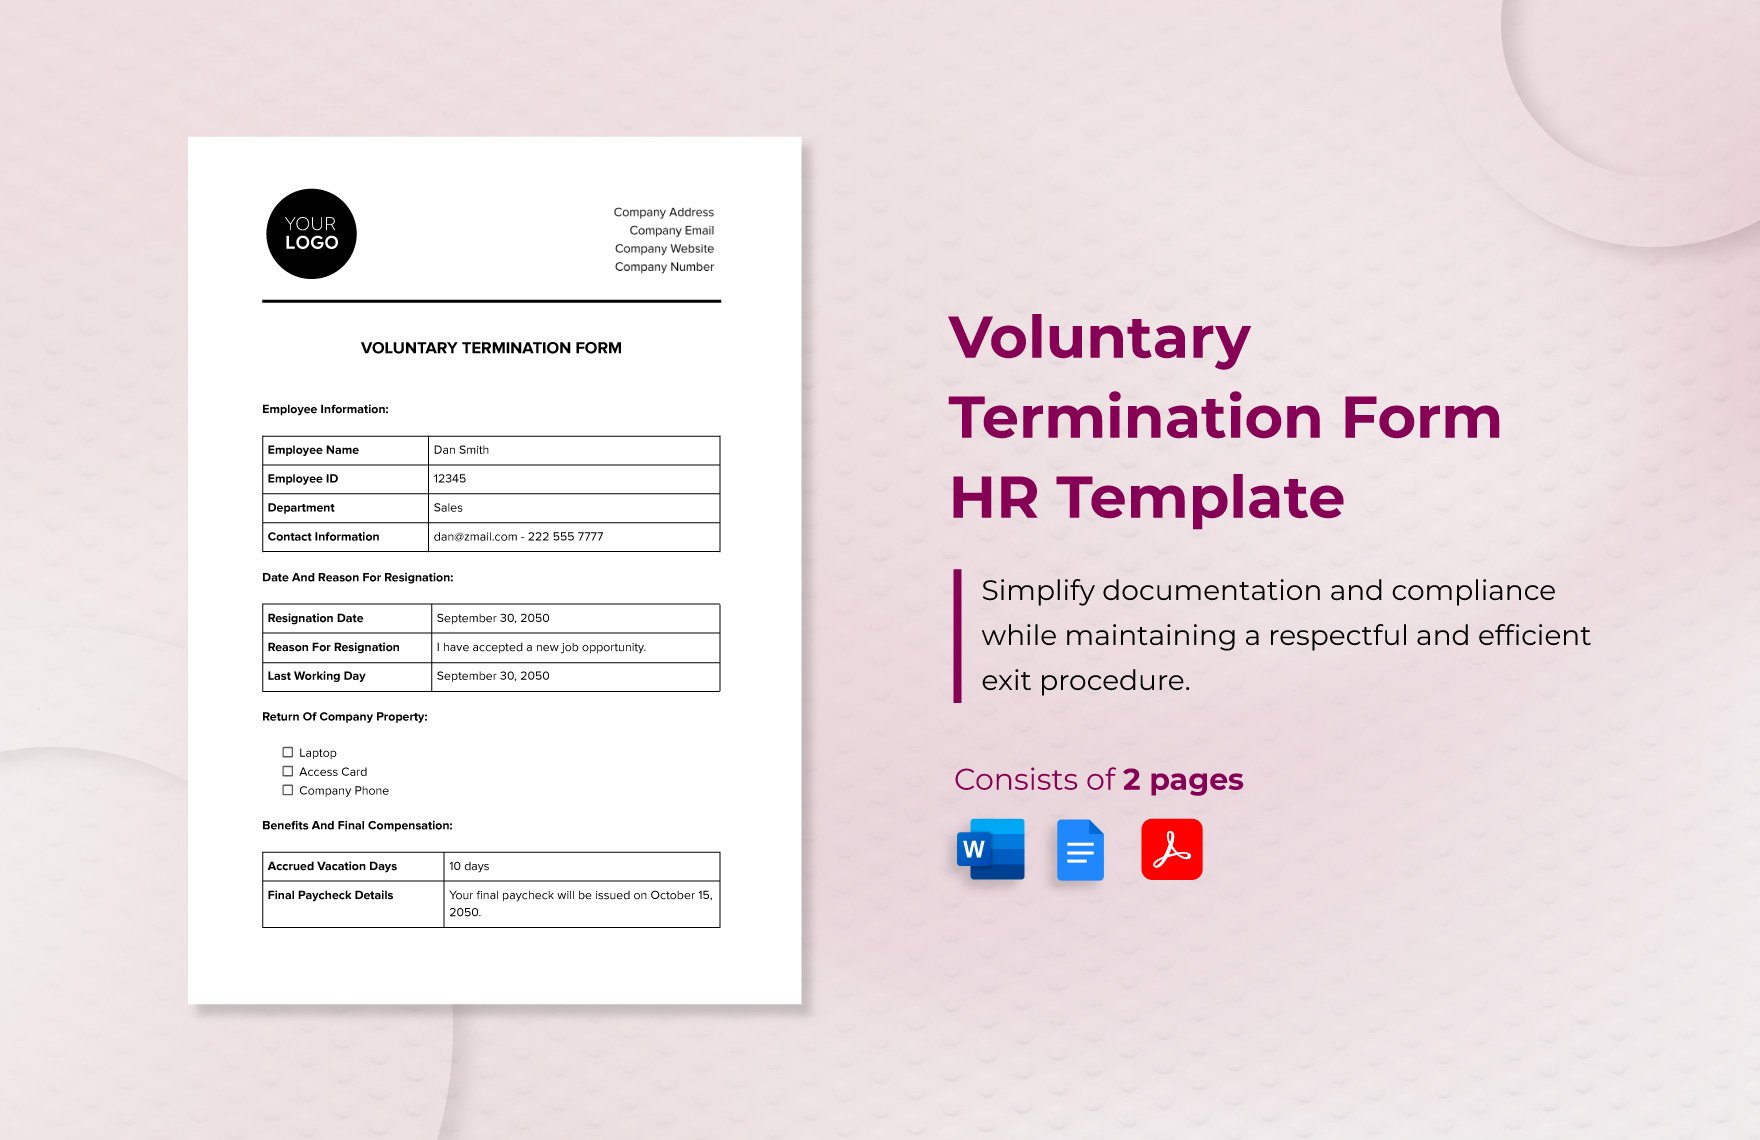 Voluntary Termination Form HR Template in Word, Google Docs, PDF